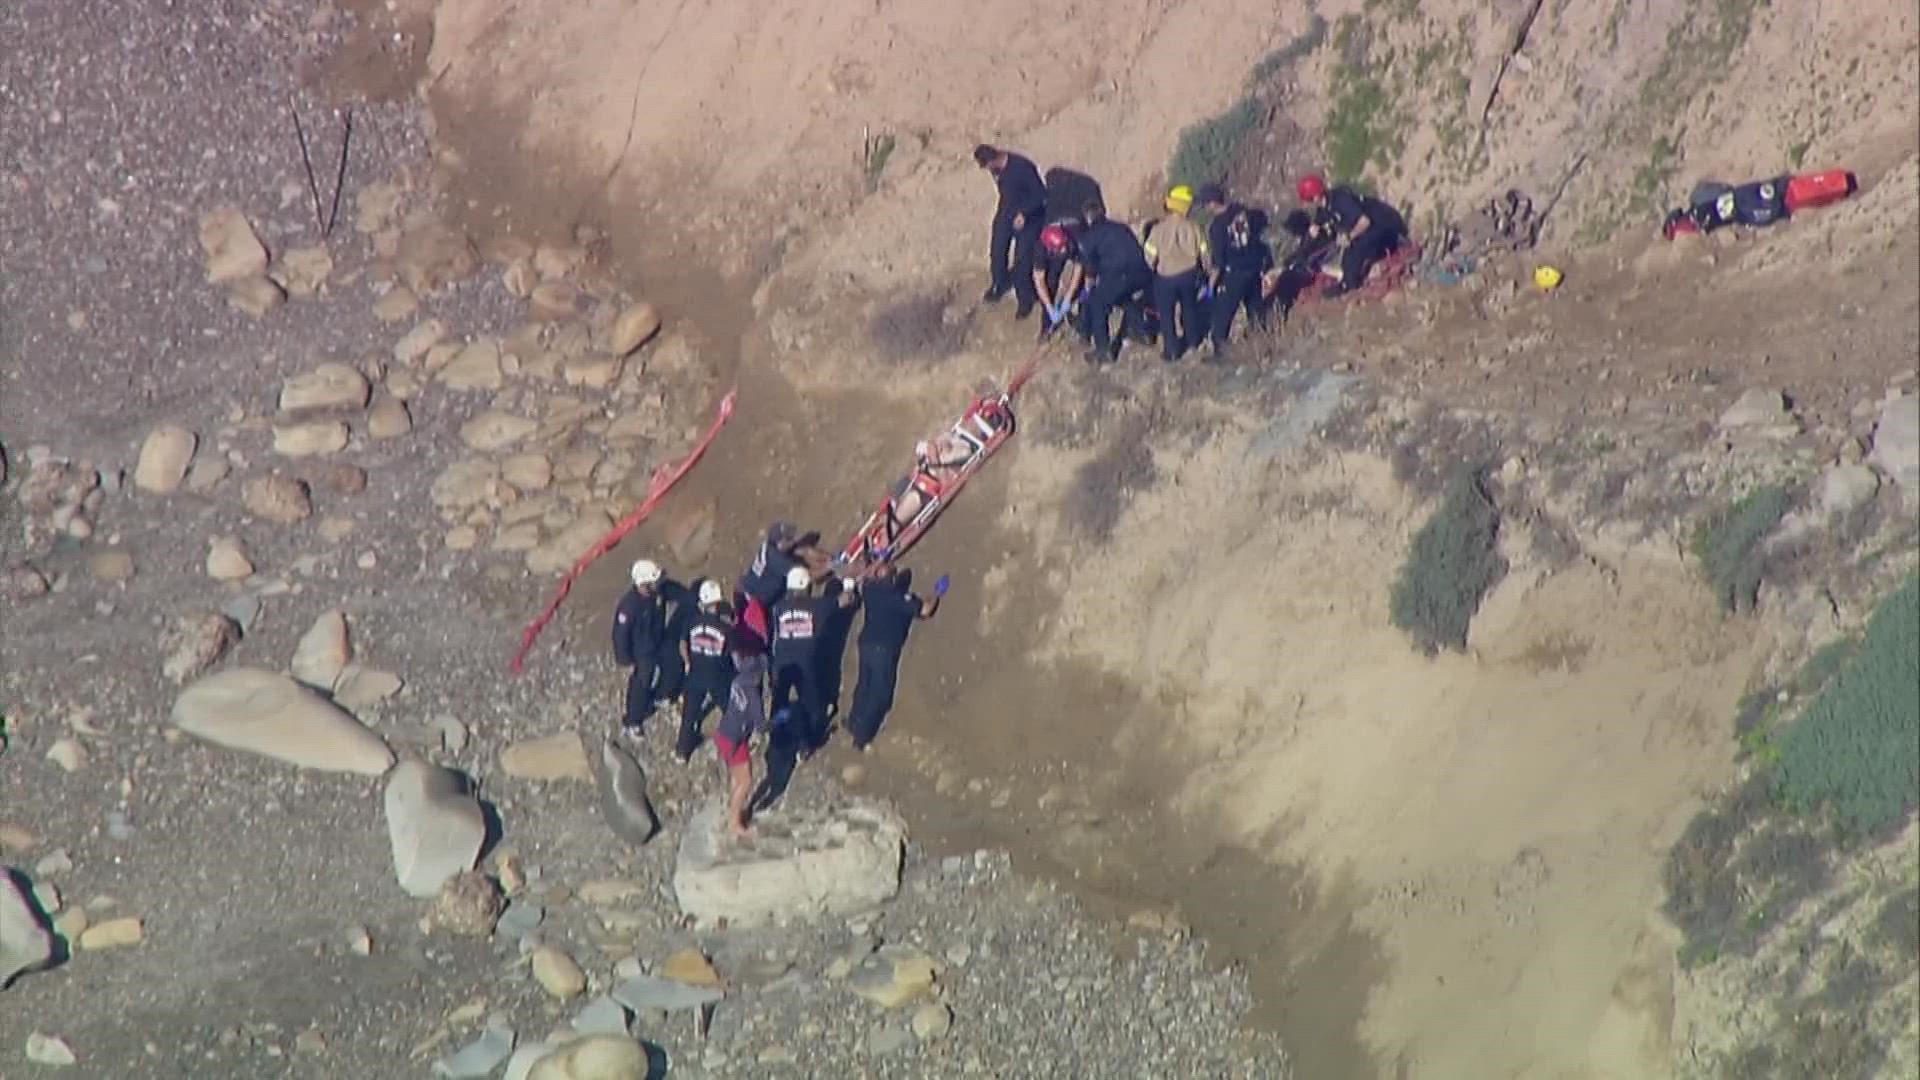 San Diego Fire-Rescue Department launched a rescue operation for a man who reportedly fell over 50 feet off a Torrey Pines cliffside Monday afternoon.